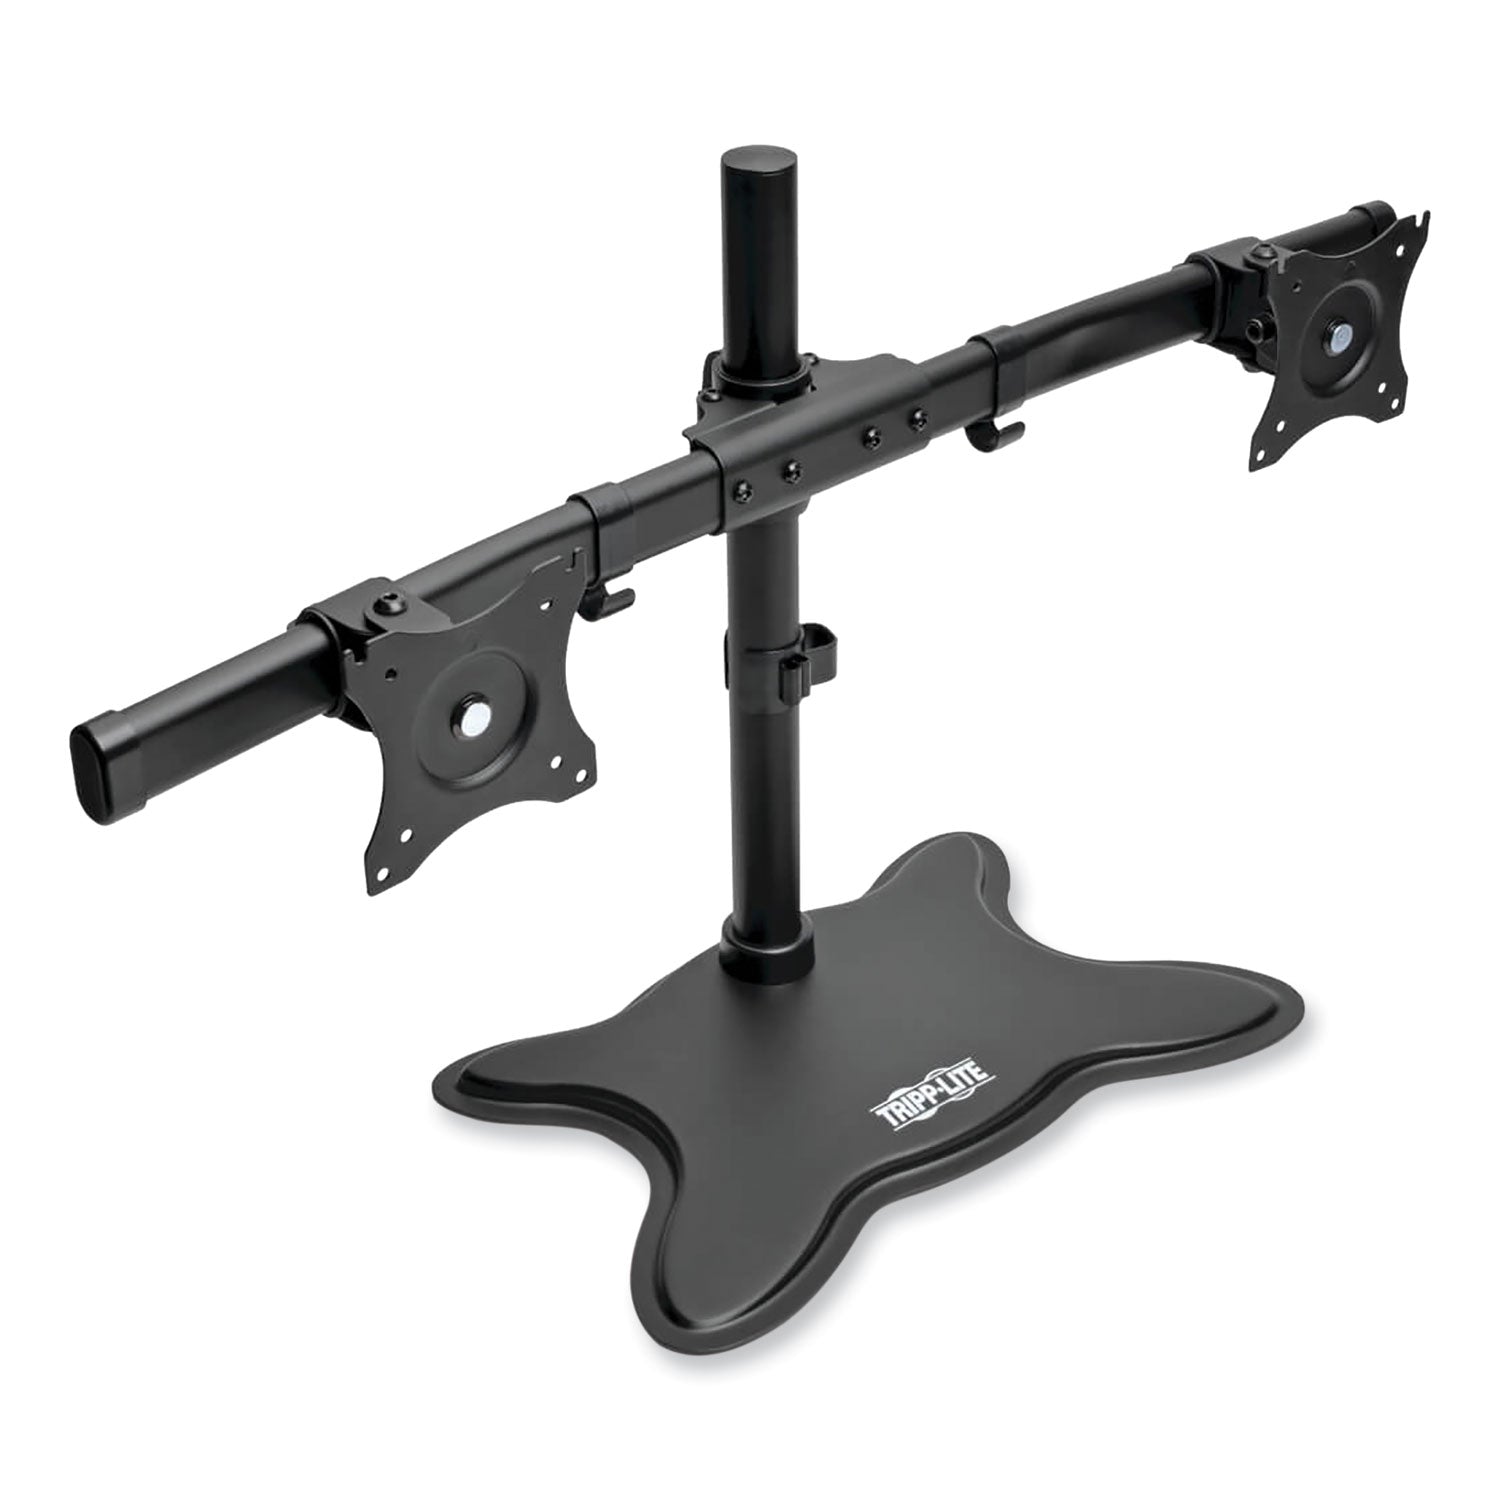 dual-desktop-monitor-stand-for-13-to-27-monitors-3169-x-10-x-1811-black-supports-26-lb_trpddr1327sdd - 2